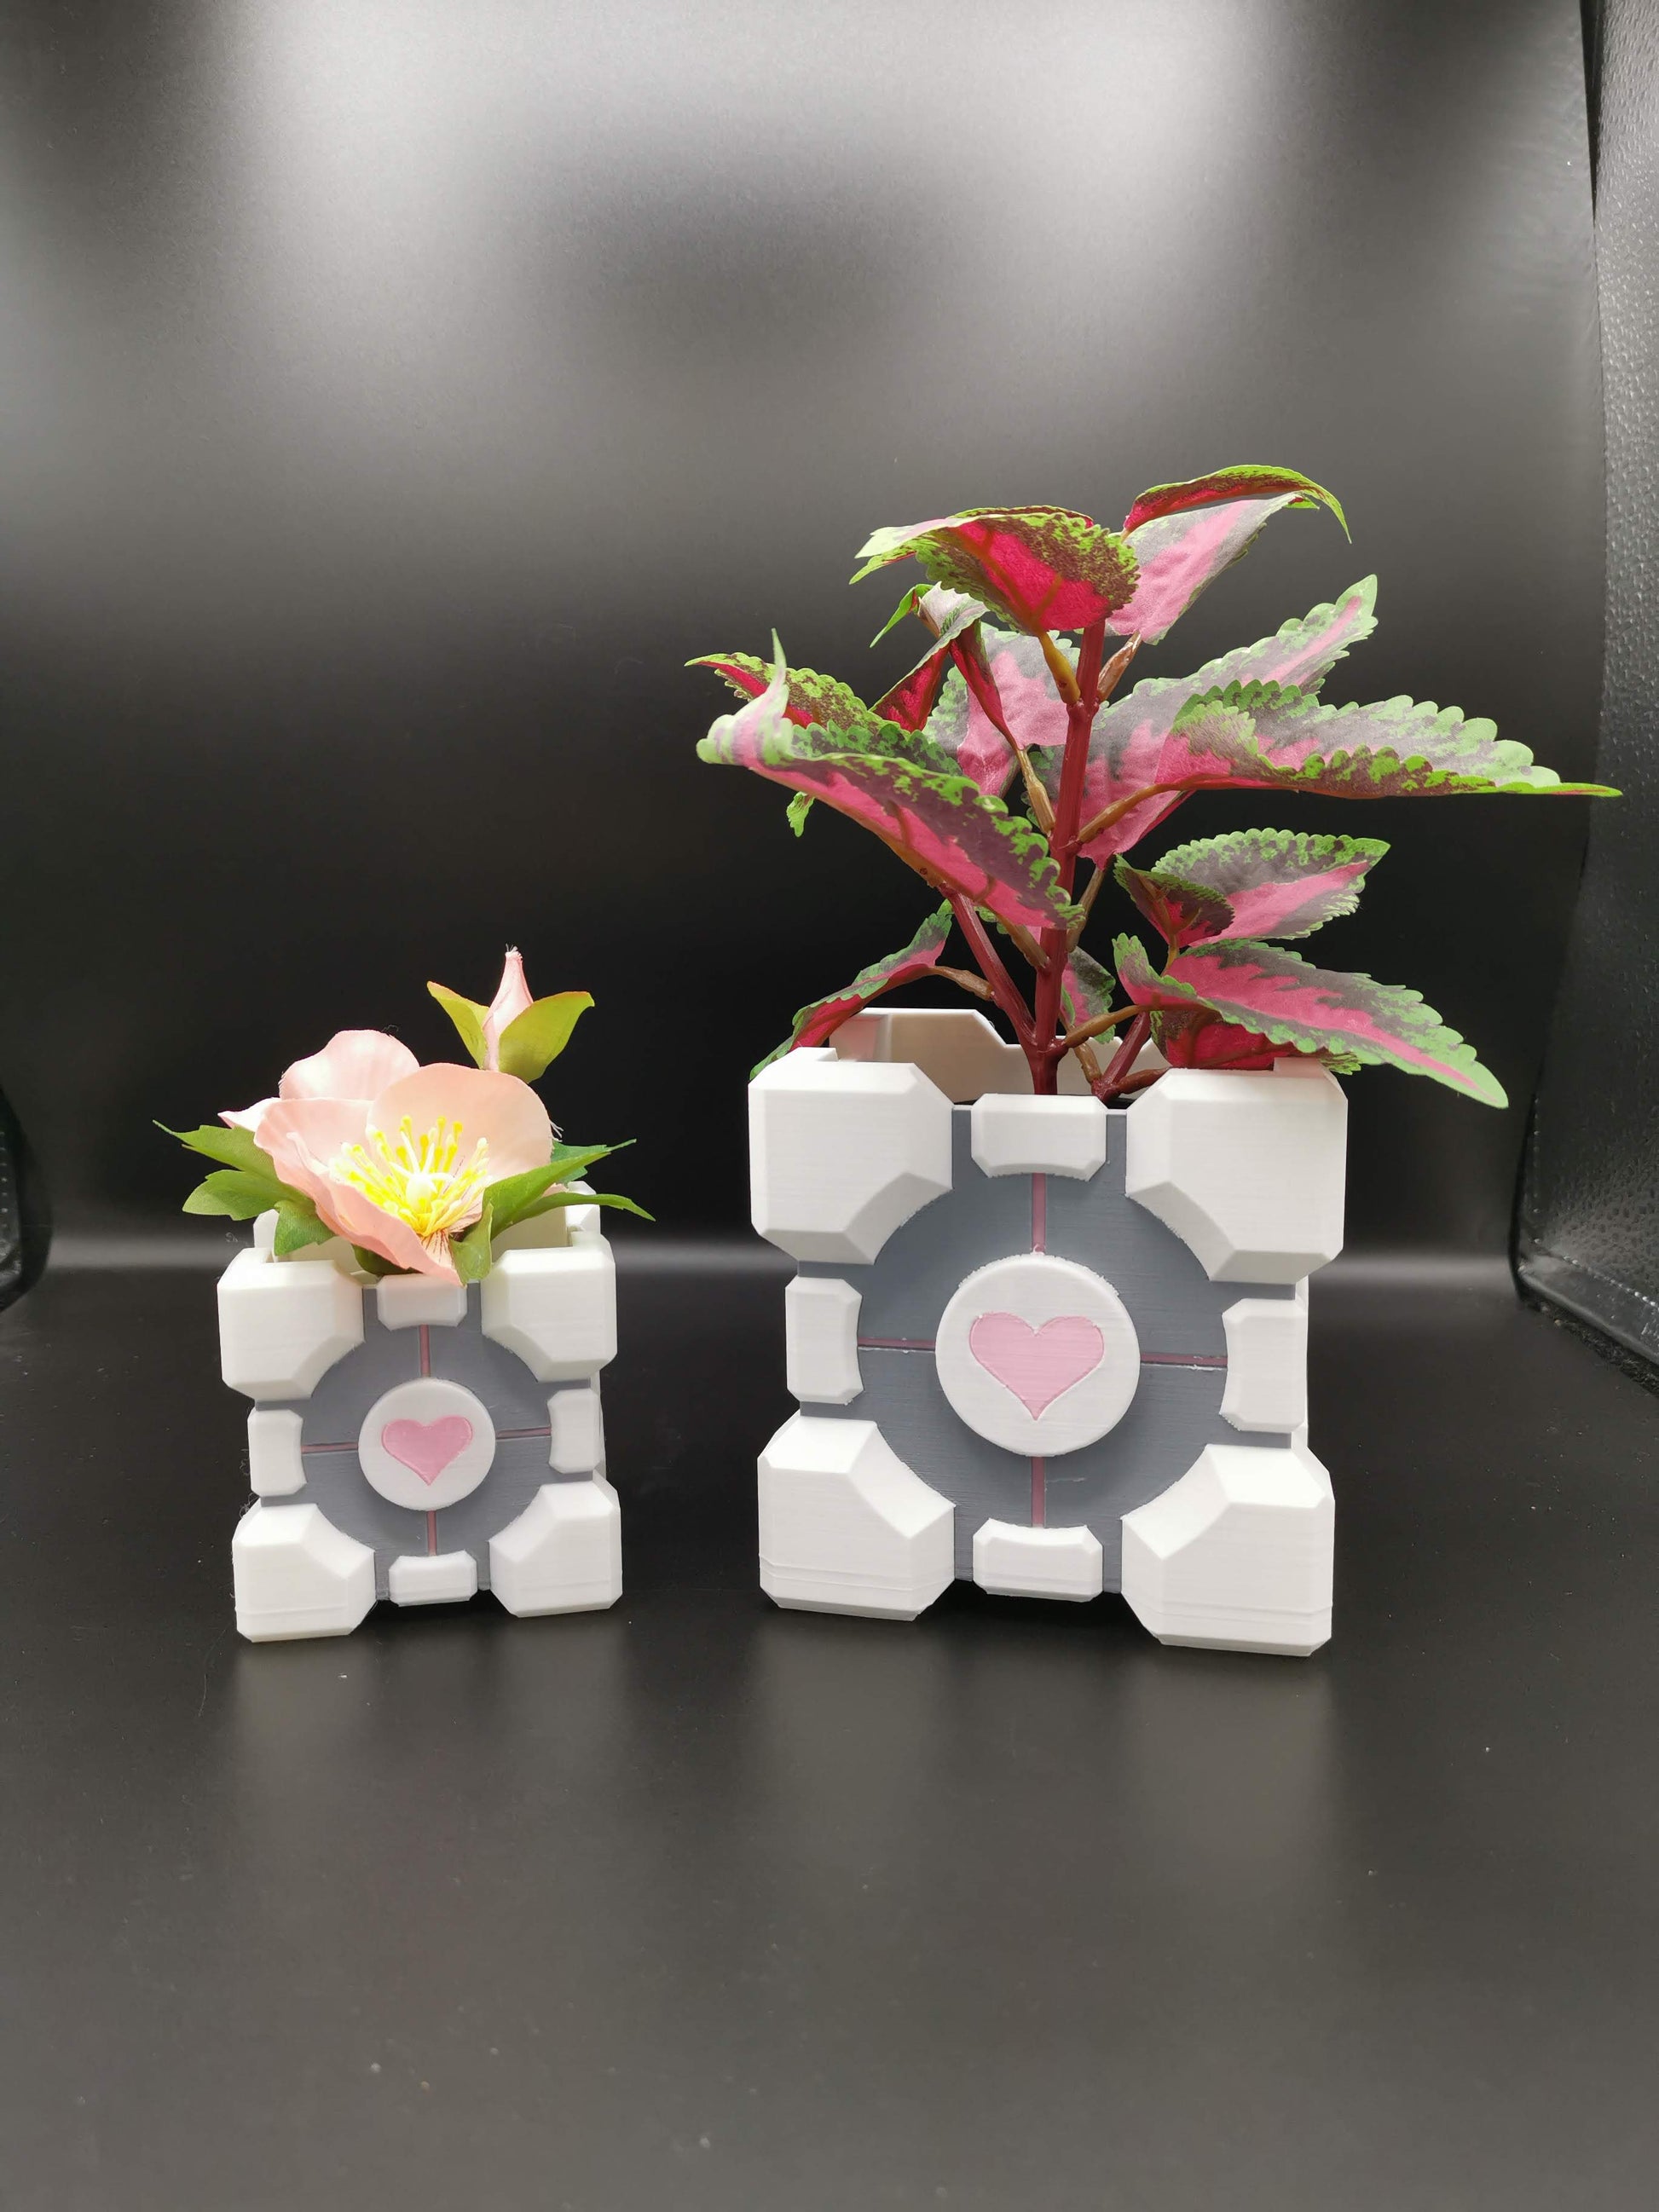 Companion Cube Portal planters in two sizes with plants